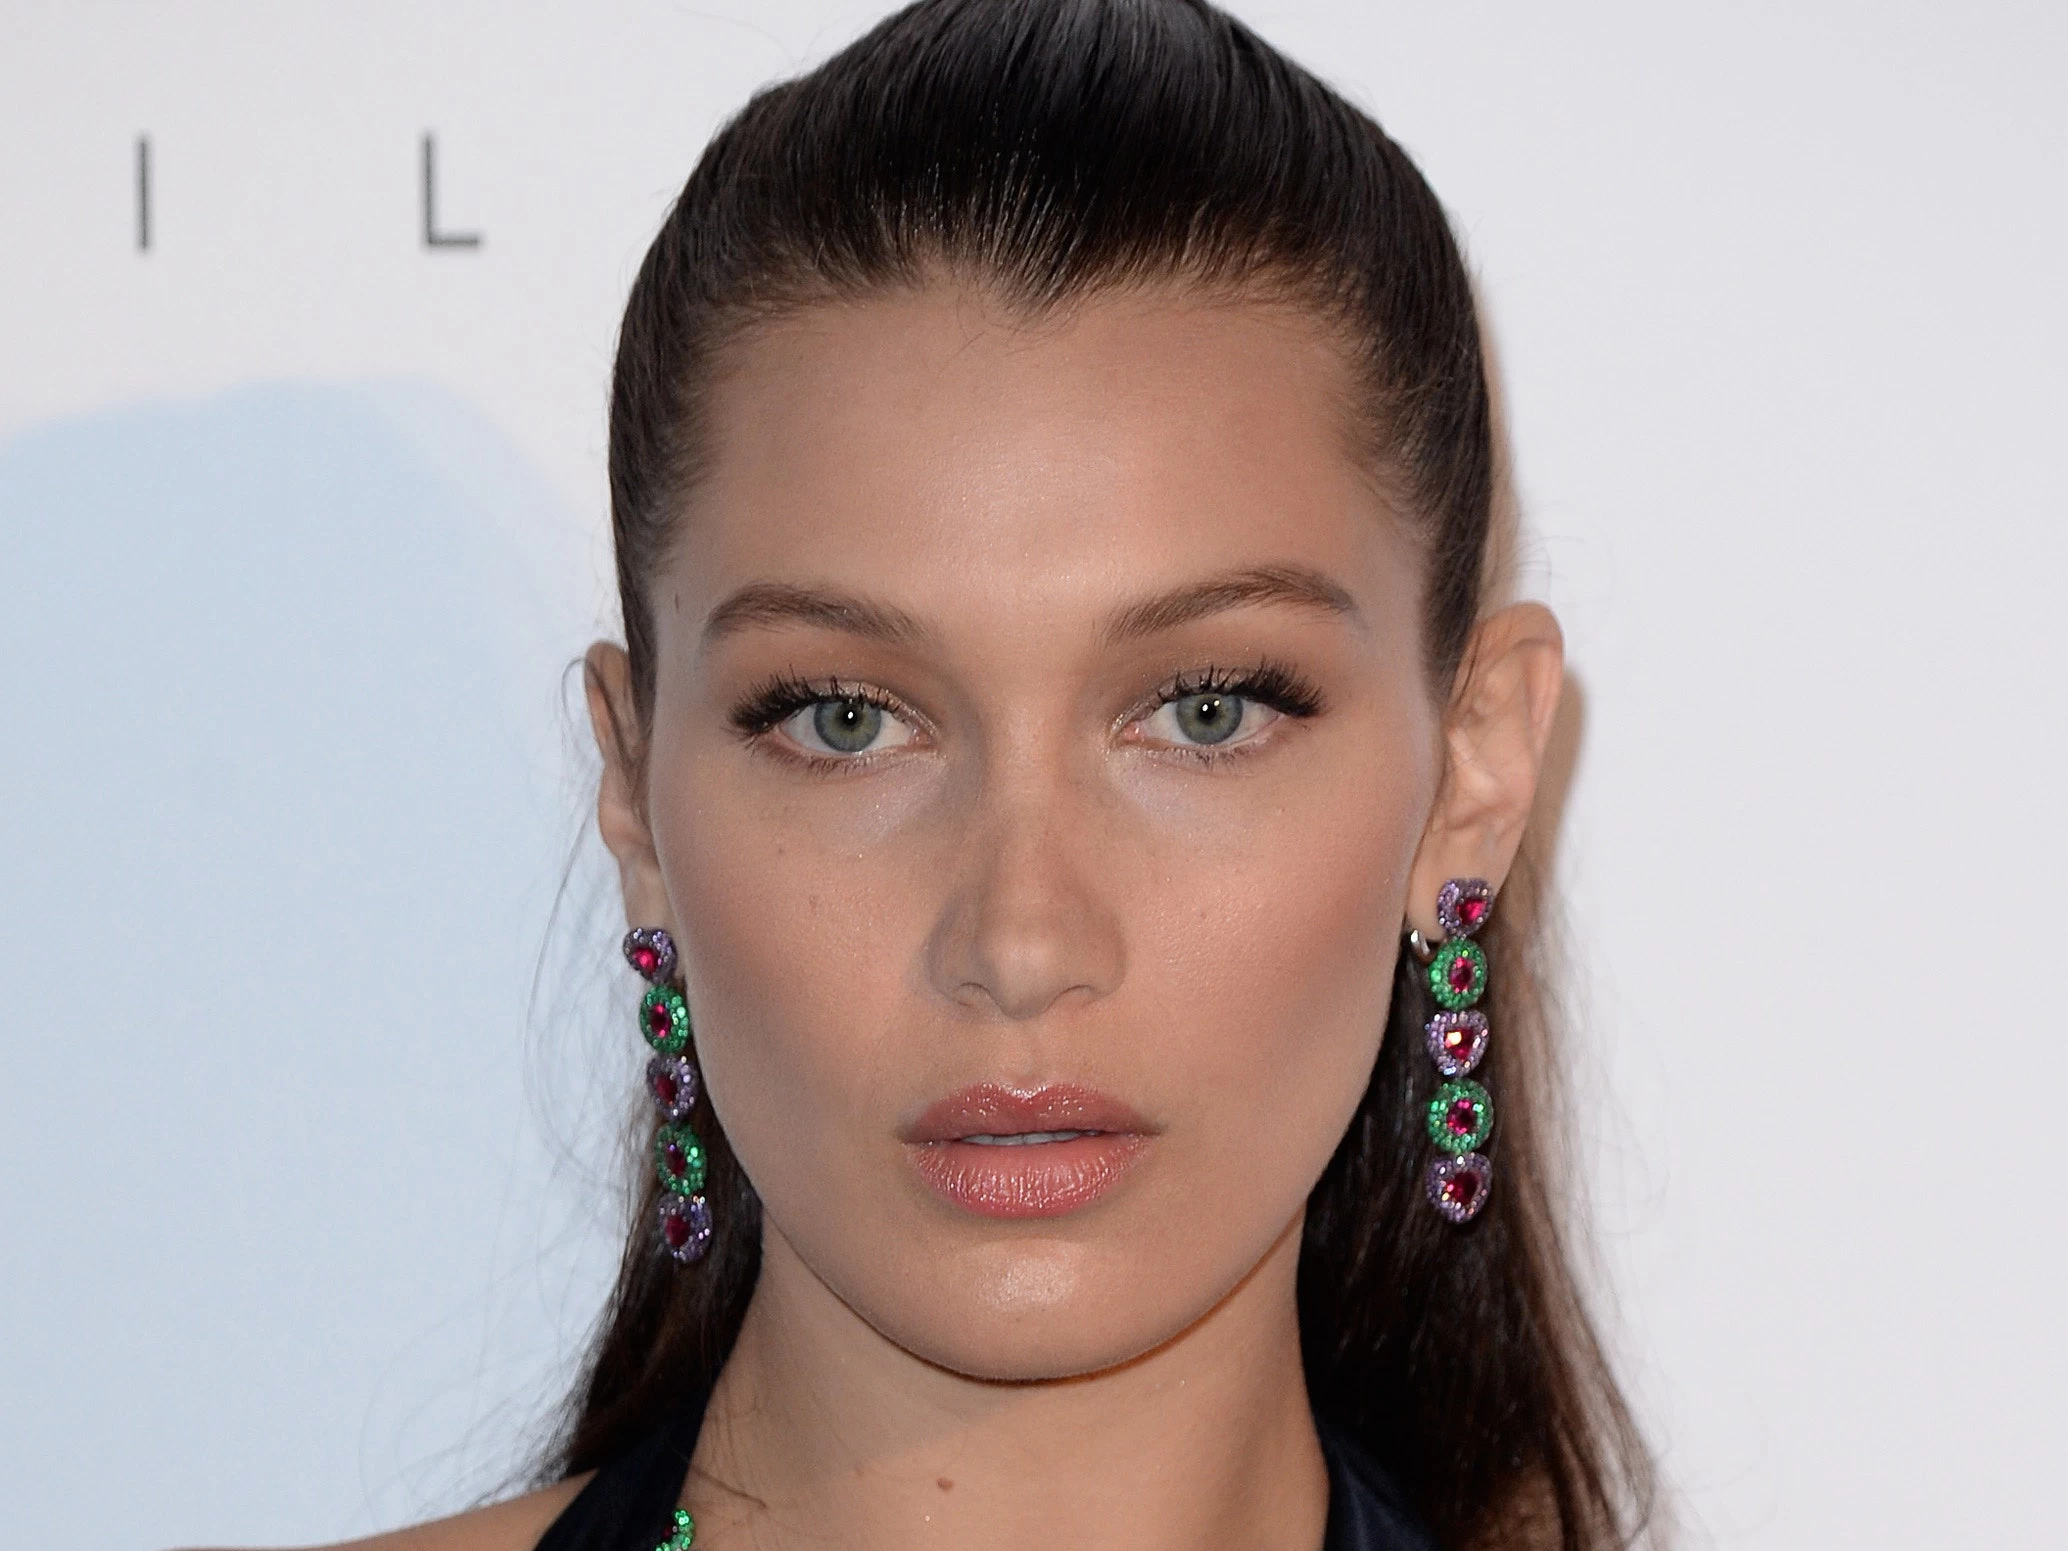 I cry for my Palestinian brothers and sisters; Bella Hadid reacts to Israel’s atrocities in Jerusalem